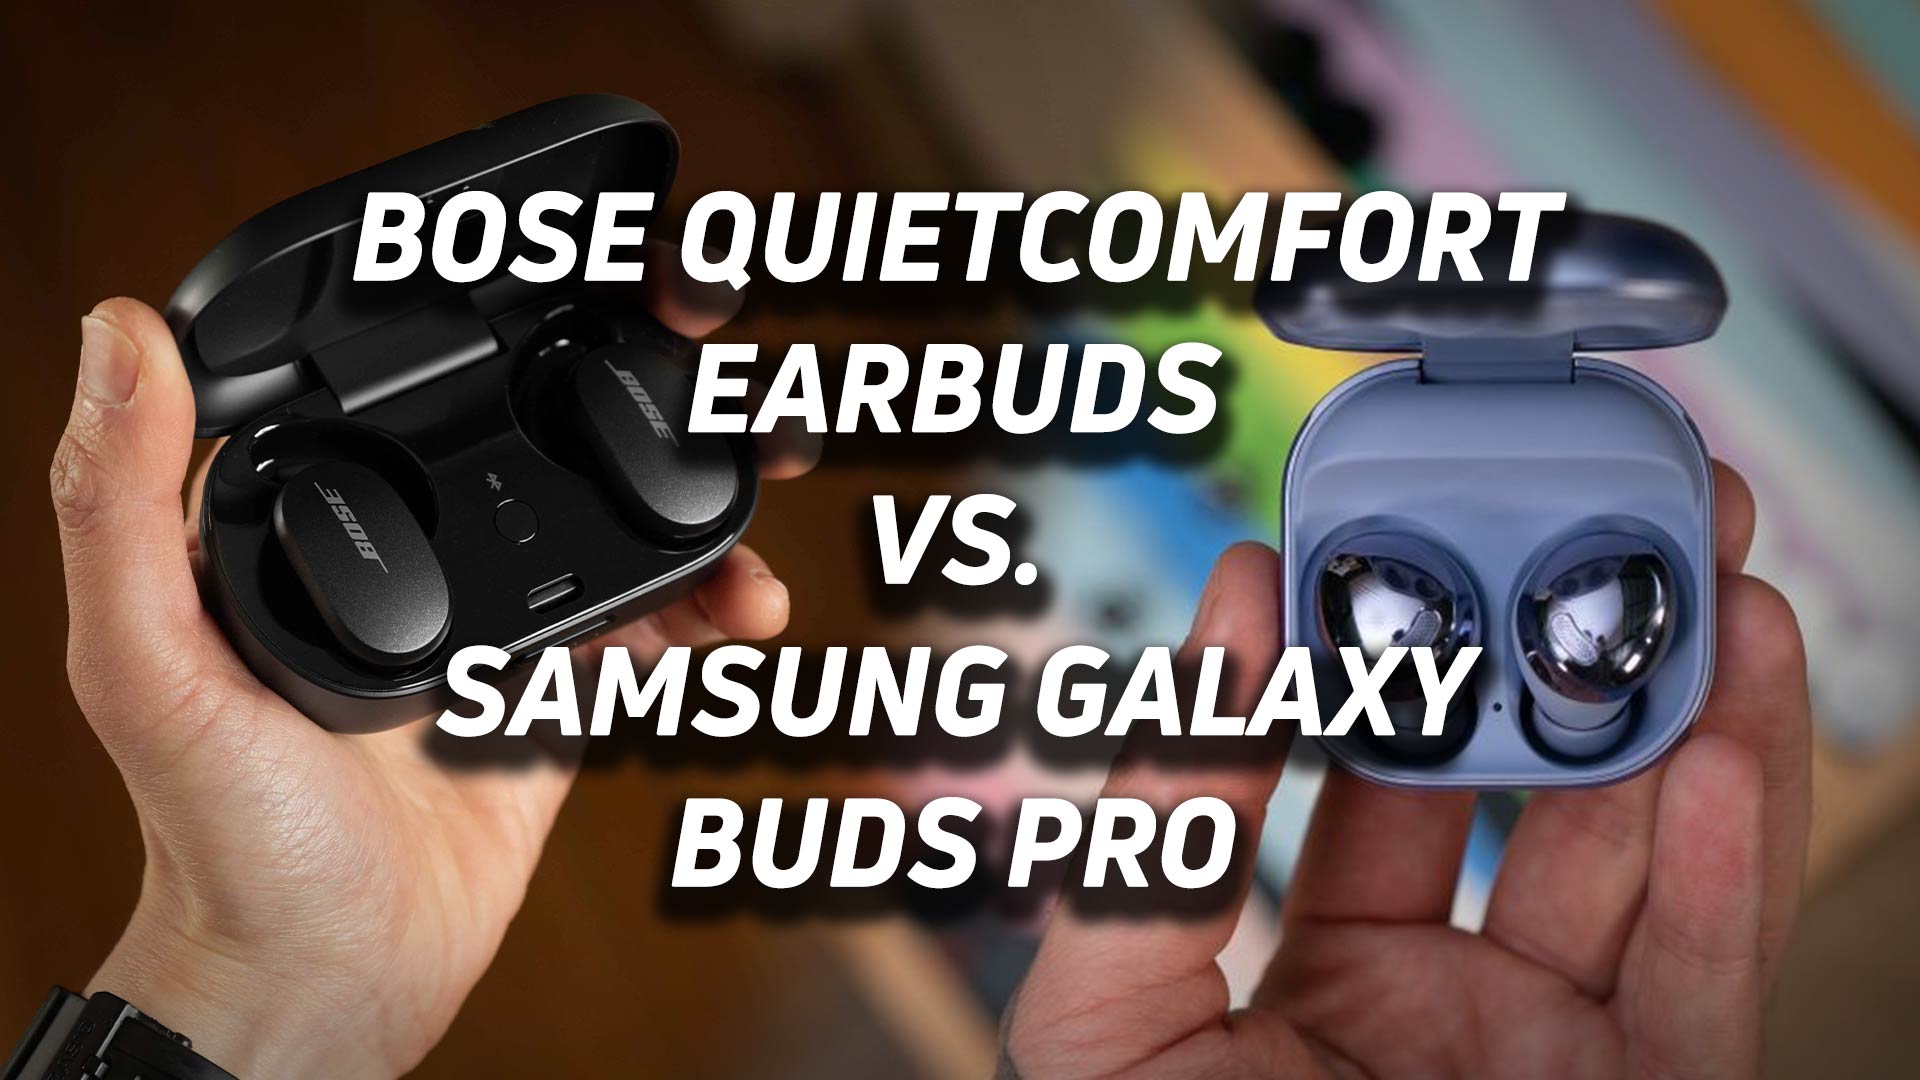 The Bose QuietComfort Earbuds and Samsung Galaxy Buds Pro featured in a blended image.